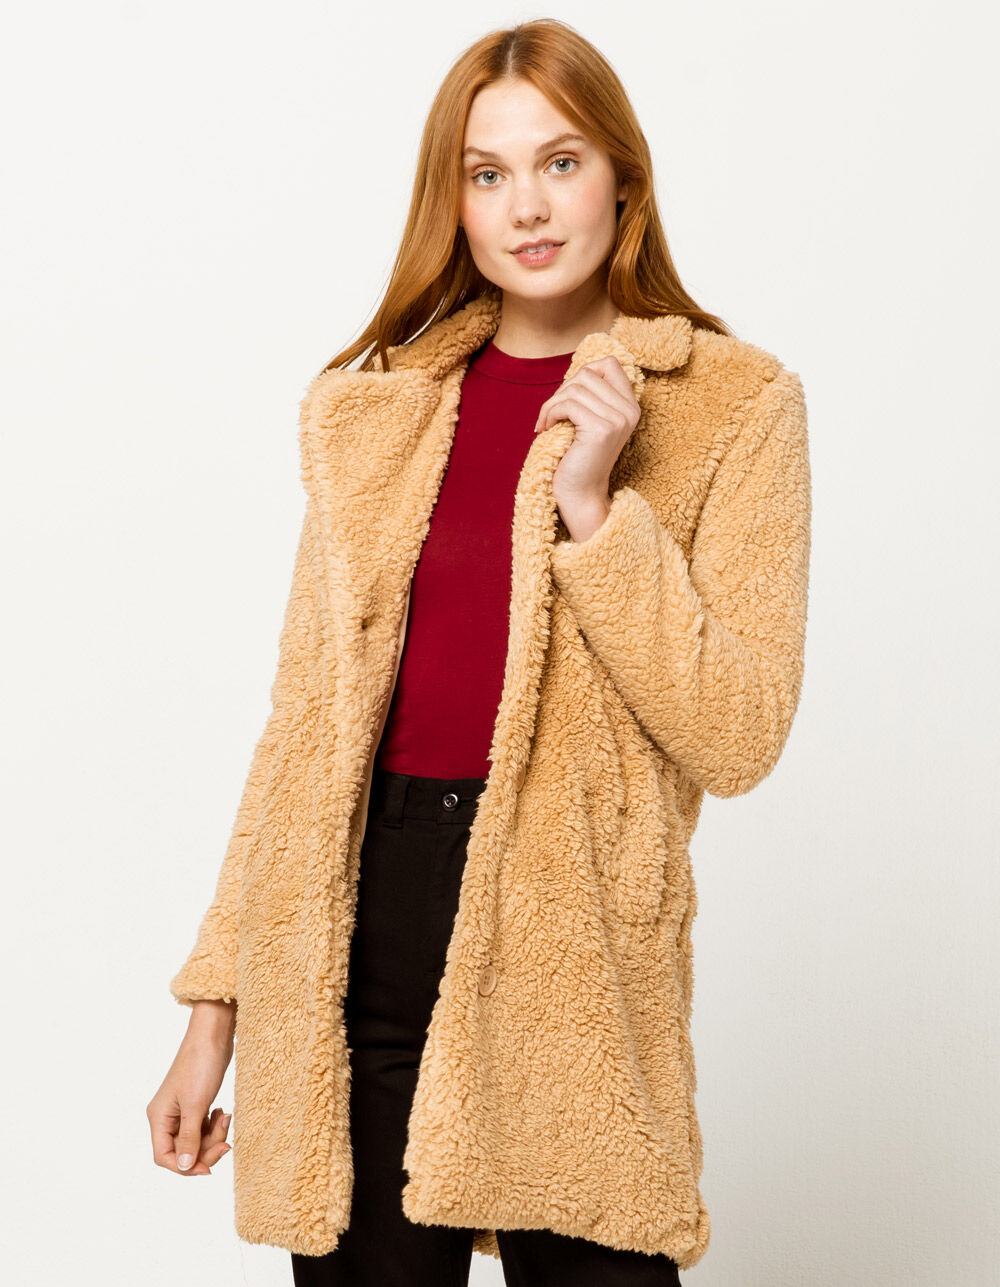 SKY AND SPARROW Cozy Duster Jacket - TAN | Tillys